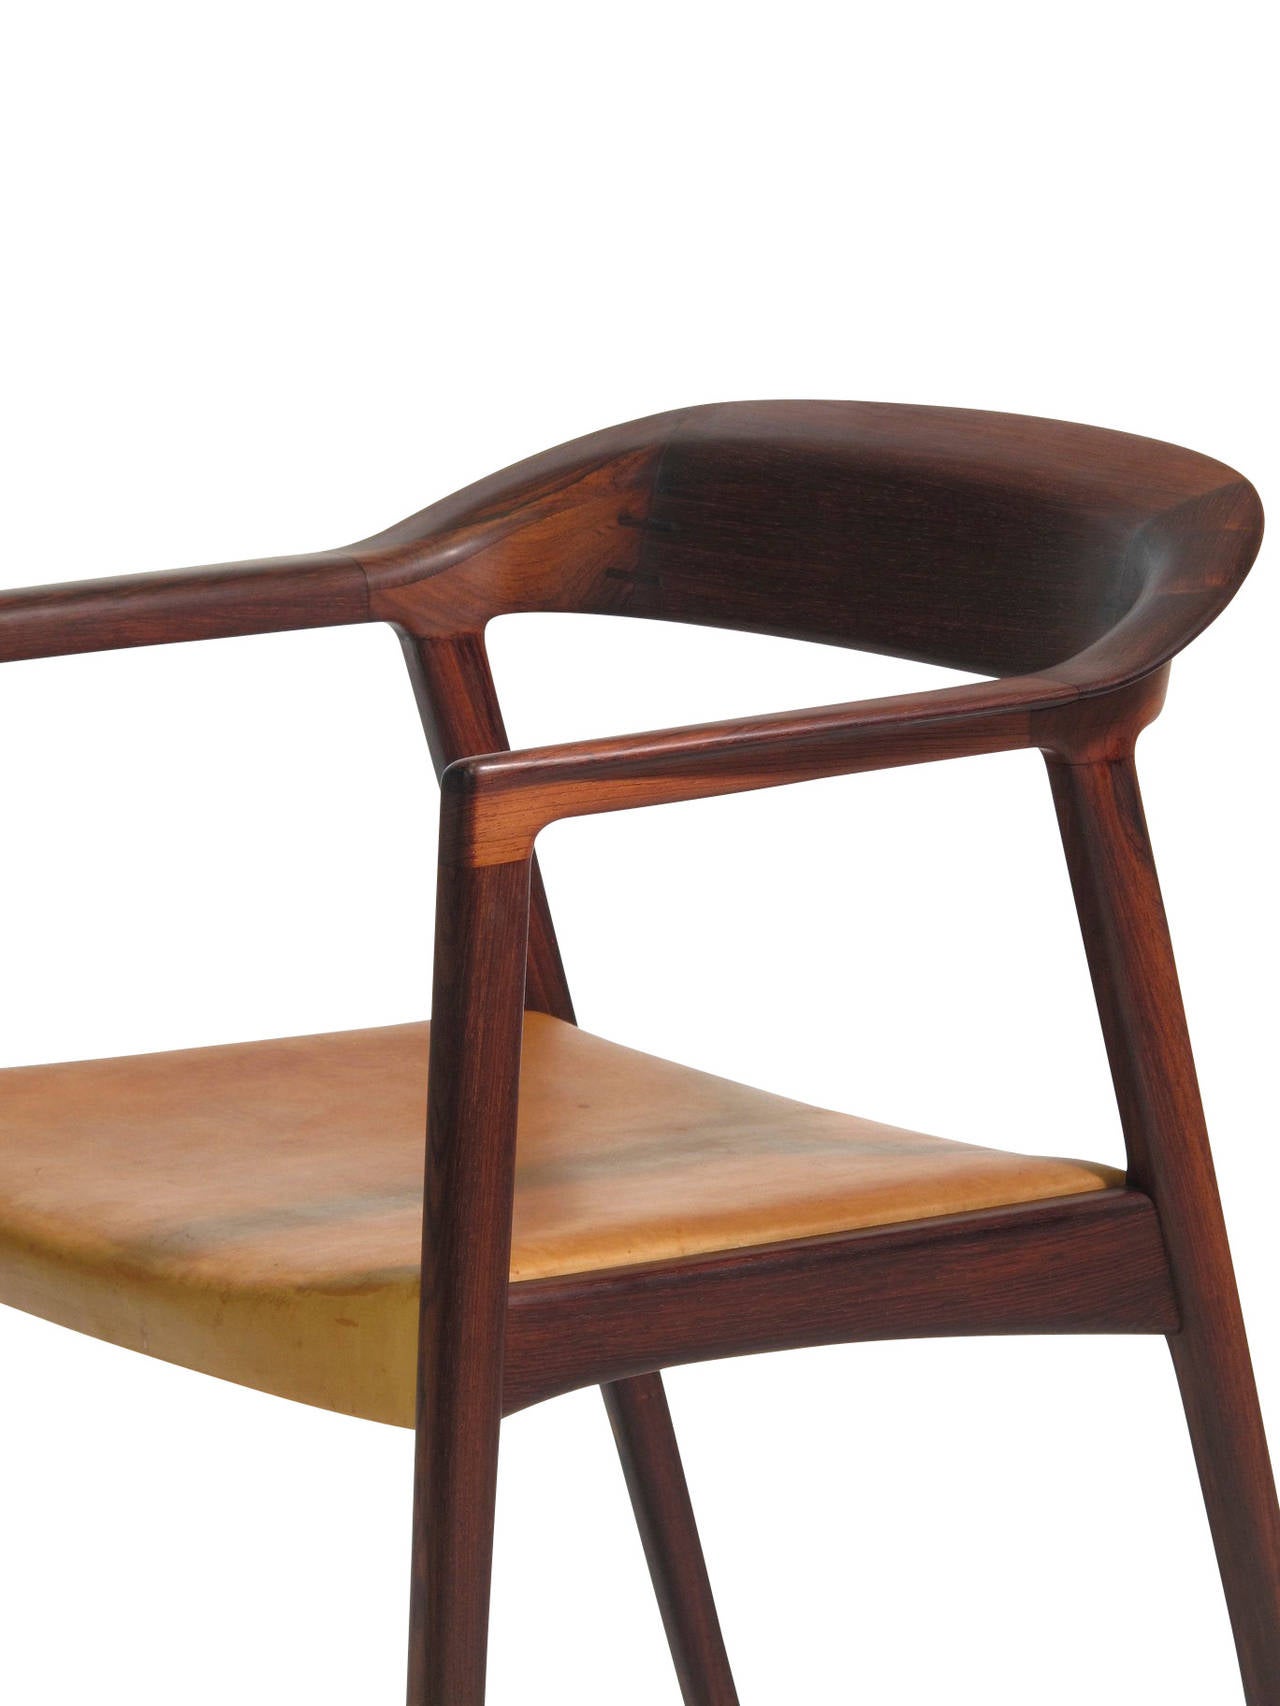 Hand-Crafted Danish Rosewood Armchair